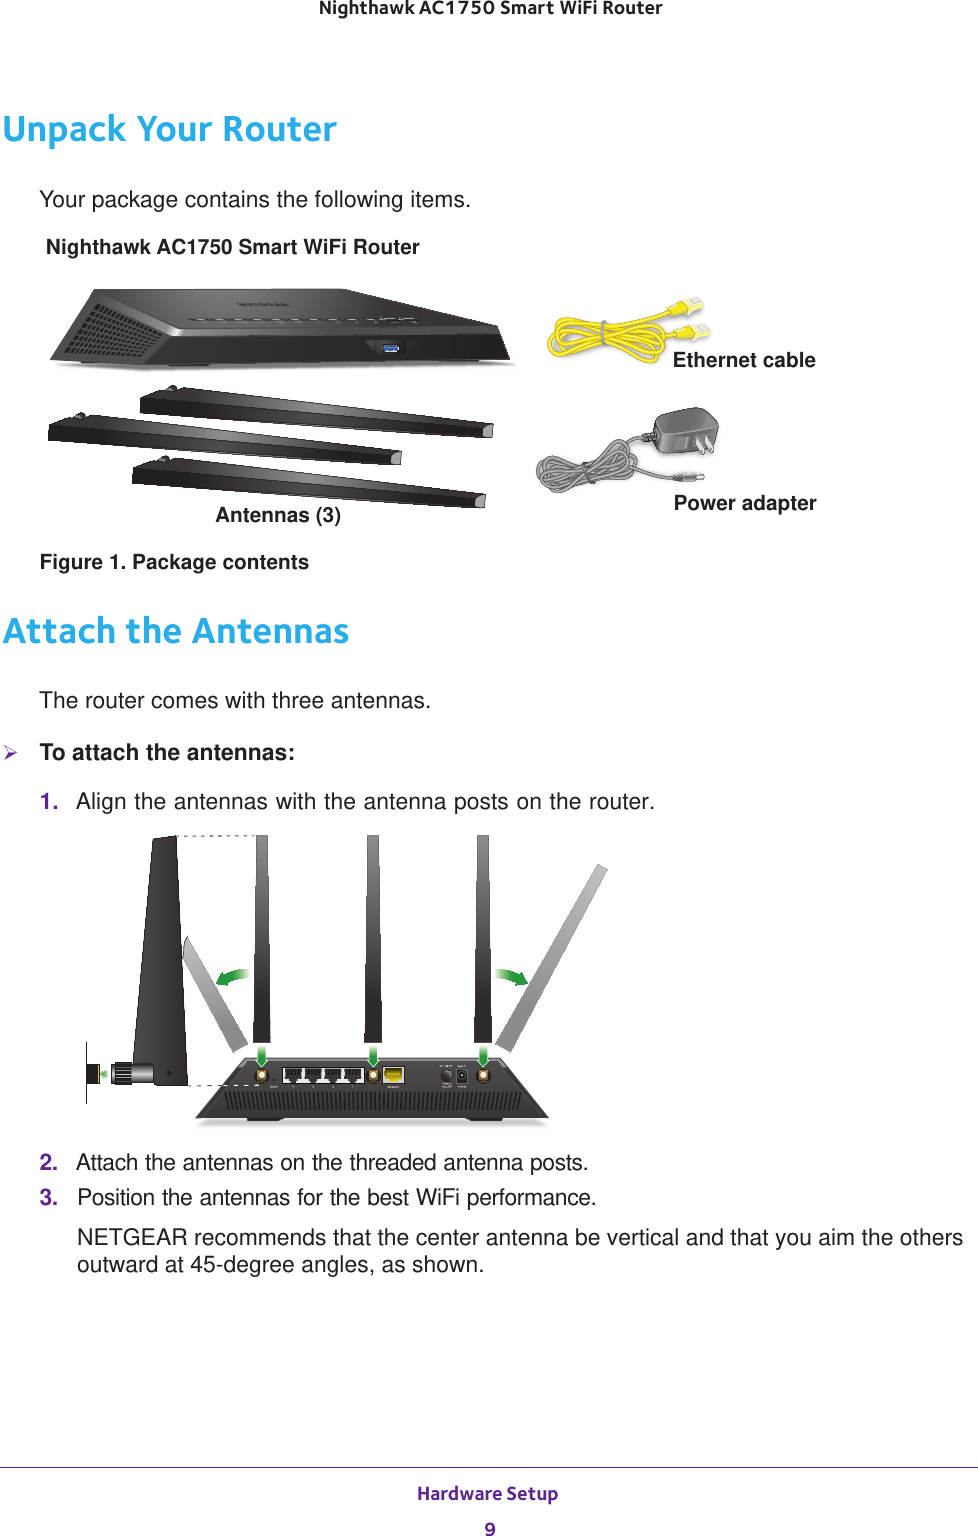 Hardware Setup 9 Nighthawk AC1750 Smart WiFi RouterUnpack Your RouterYour package contains the following items.Nighthawk AC1750 Smart WiFi Router Antennas (3)Ethernet cablePower adapterFigure 1. Package contentsAttach the AntennasThe router comes with three antennas.To attach the antennas:1.  Align the antennas with the antenna posts on the router.2.  Attach the antennas on the threaded antenna posts.3.  Position the antennas for the best WiFi performance.NETGEAR recommends that the center antenna be vertical and that you aim the others outward at 45-degree angles, as shown.